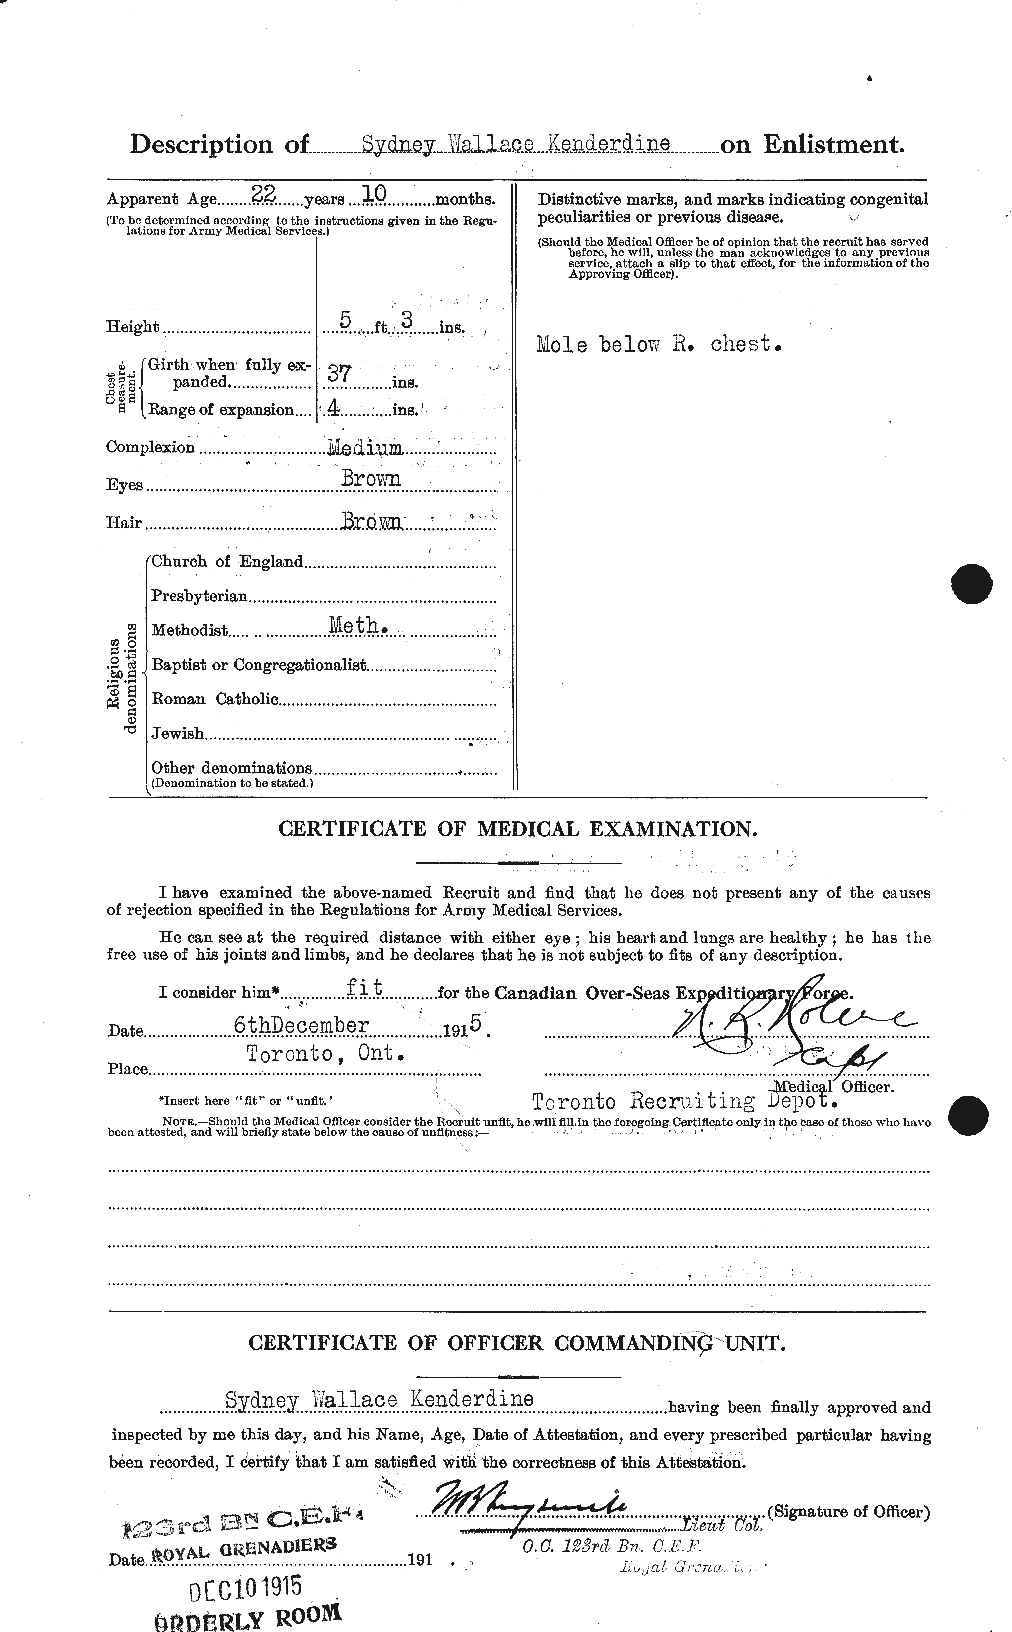 Personnel Records of the First World War - CEF 435623b